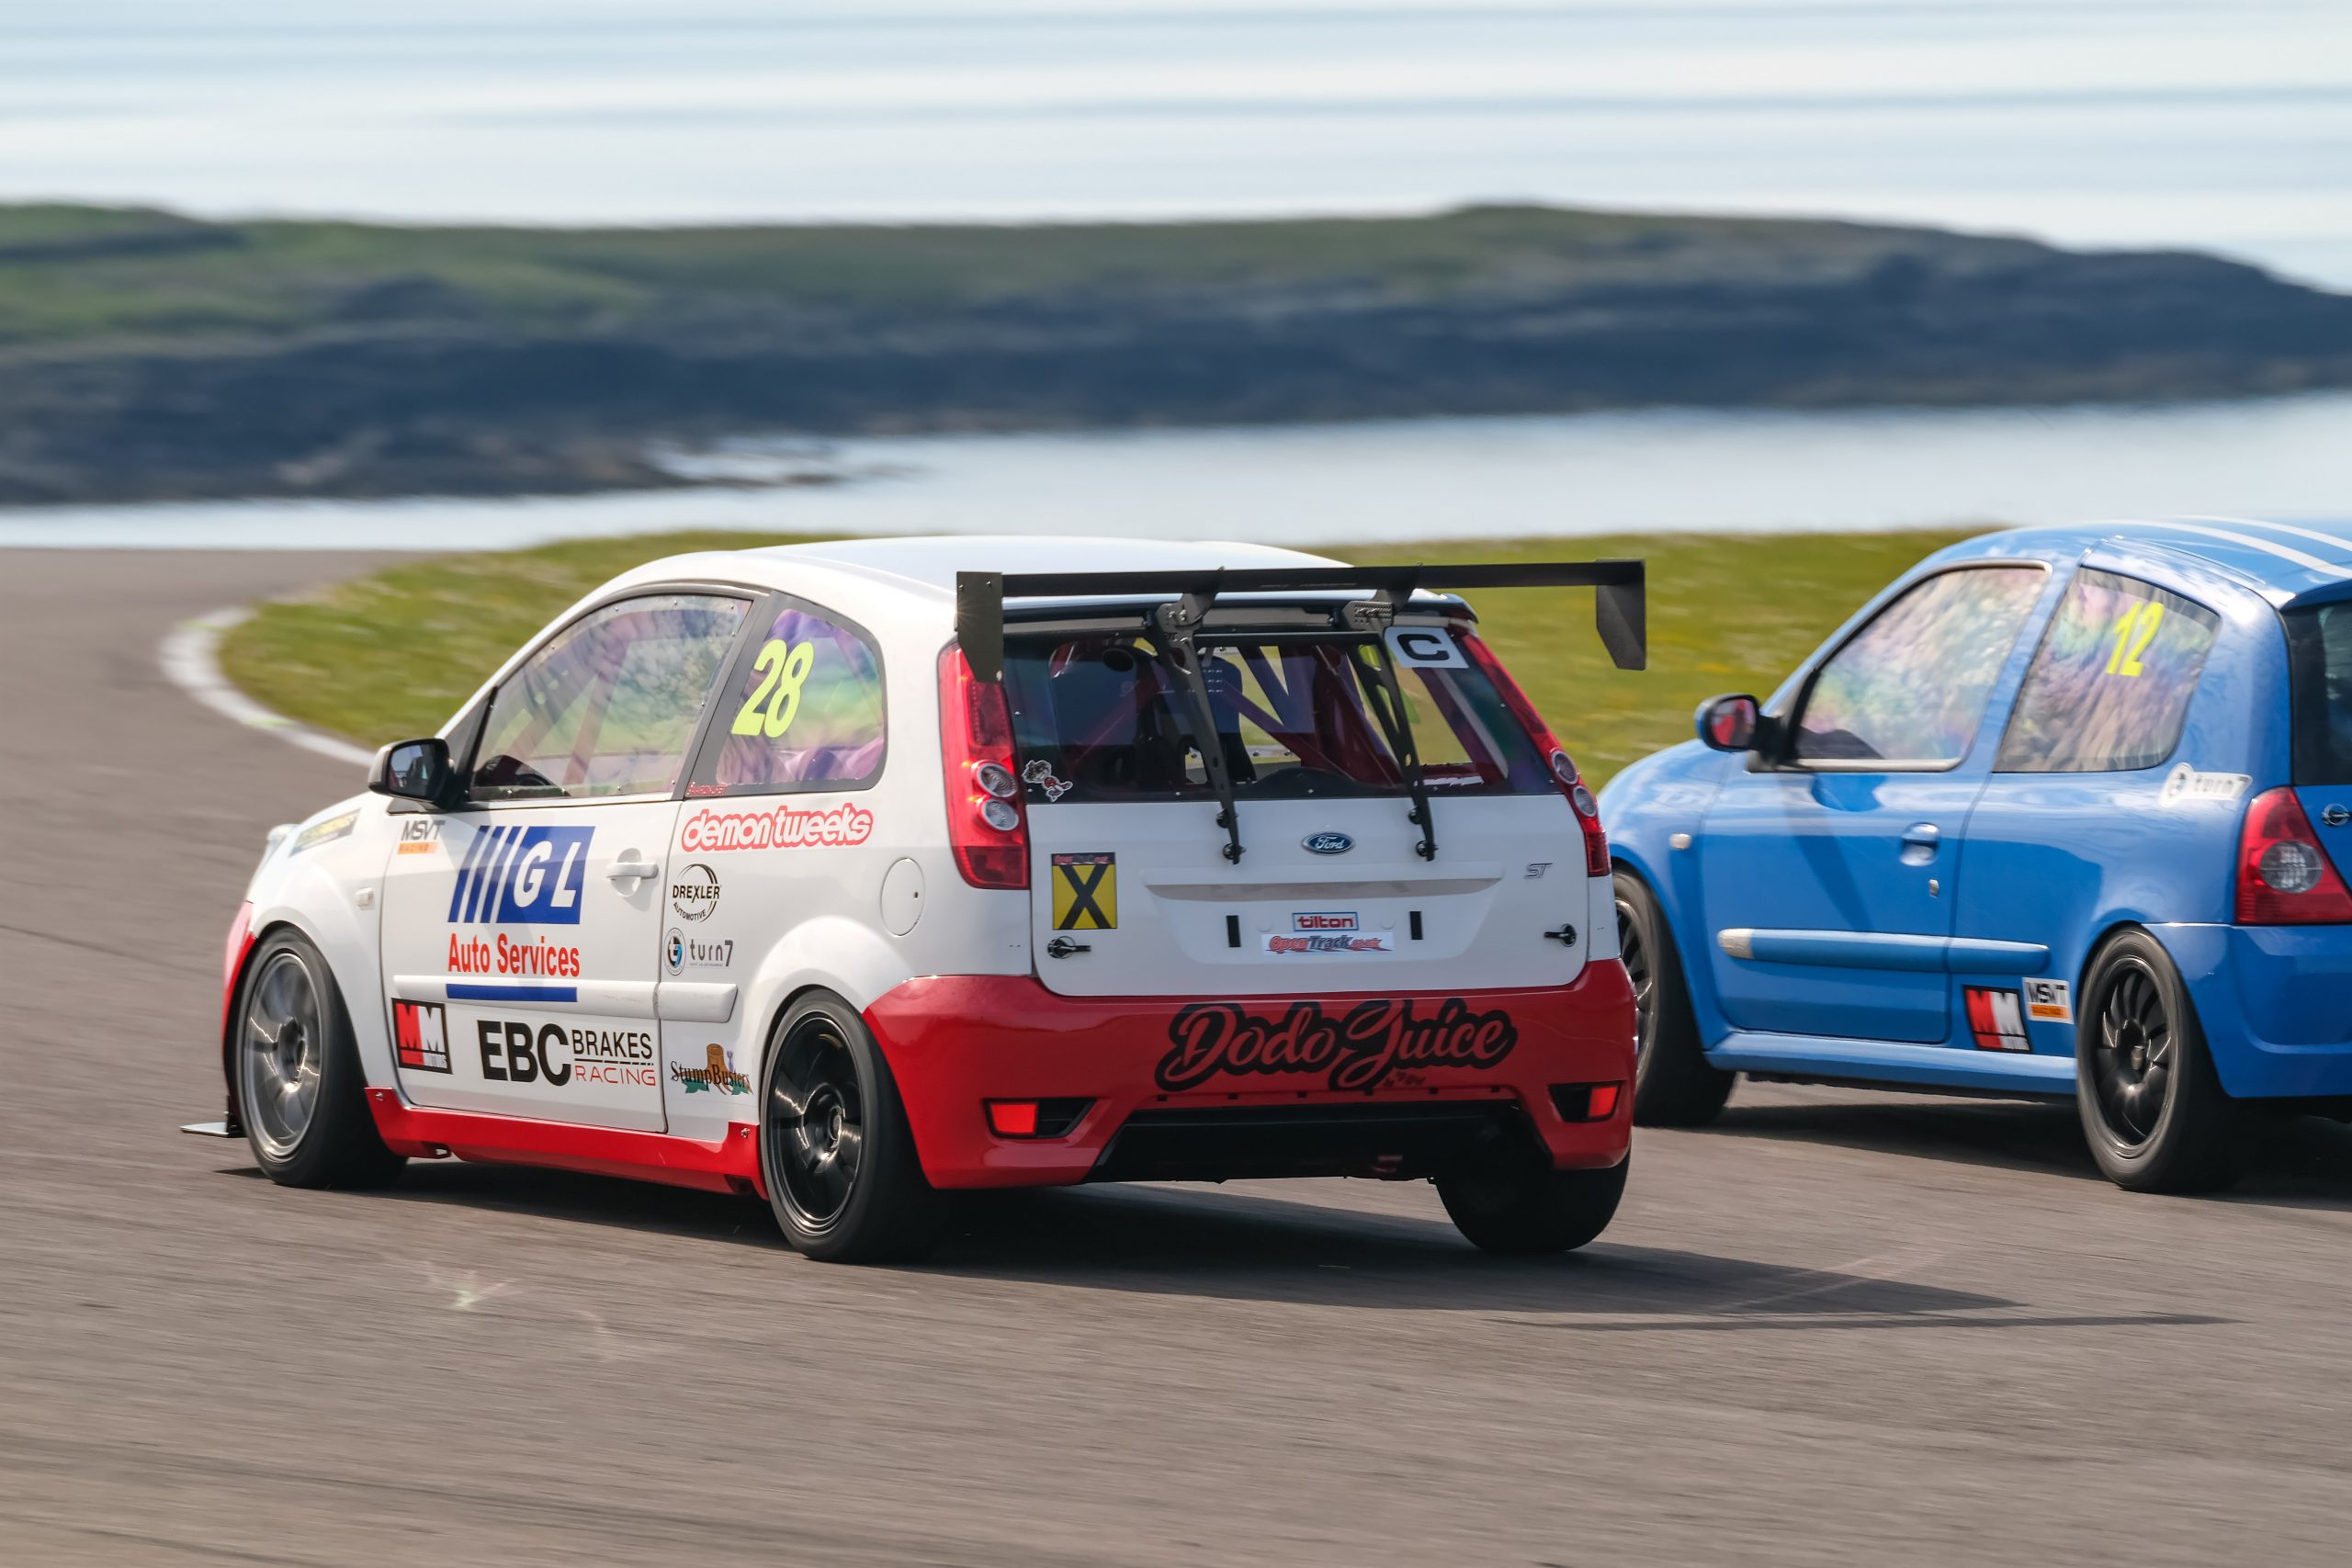 EBC Brakes Racing-Equipped Fiesta Driver Continues MSVT Trackday Trophy Campaign